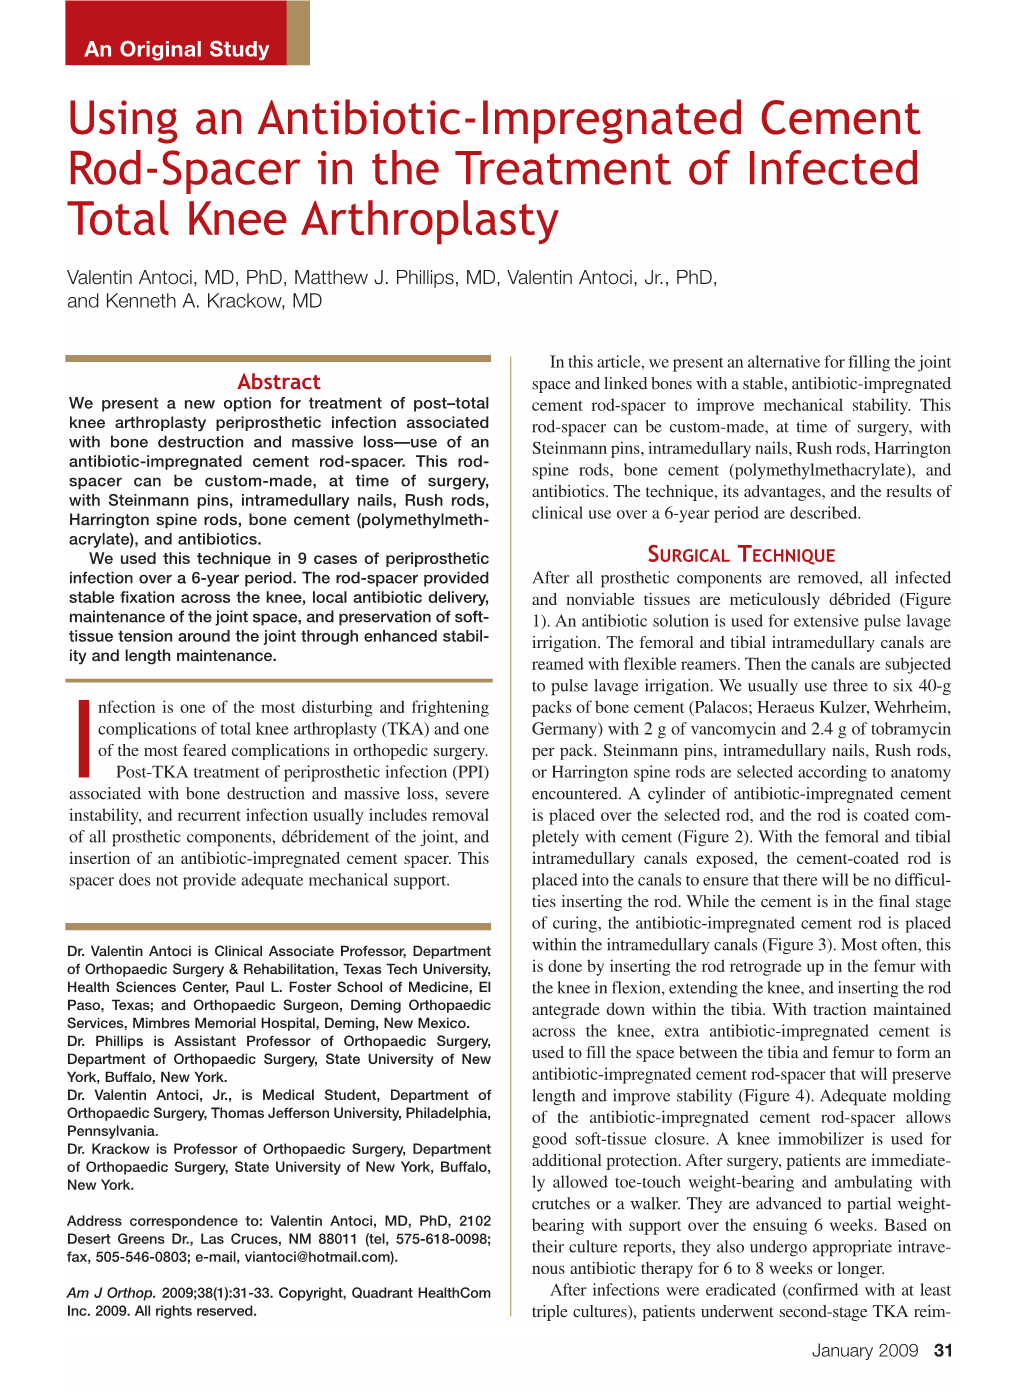 Using an Antibiotic-Impregnated Cement Rod-Spacer in the Treatment of Infected Total Knee Arthroplasty